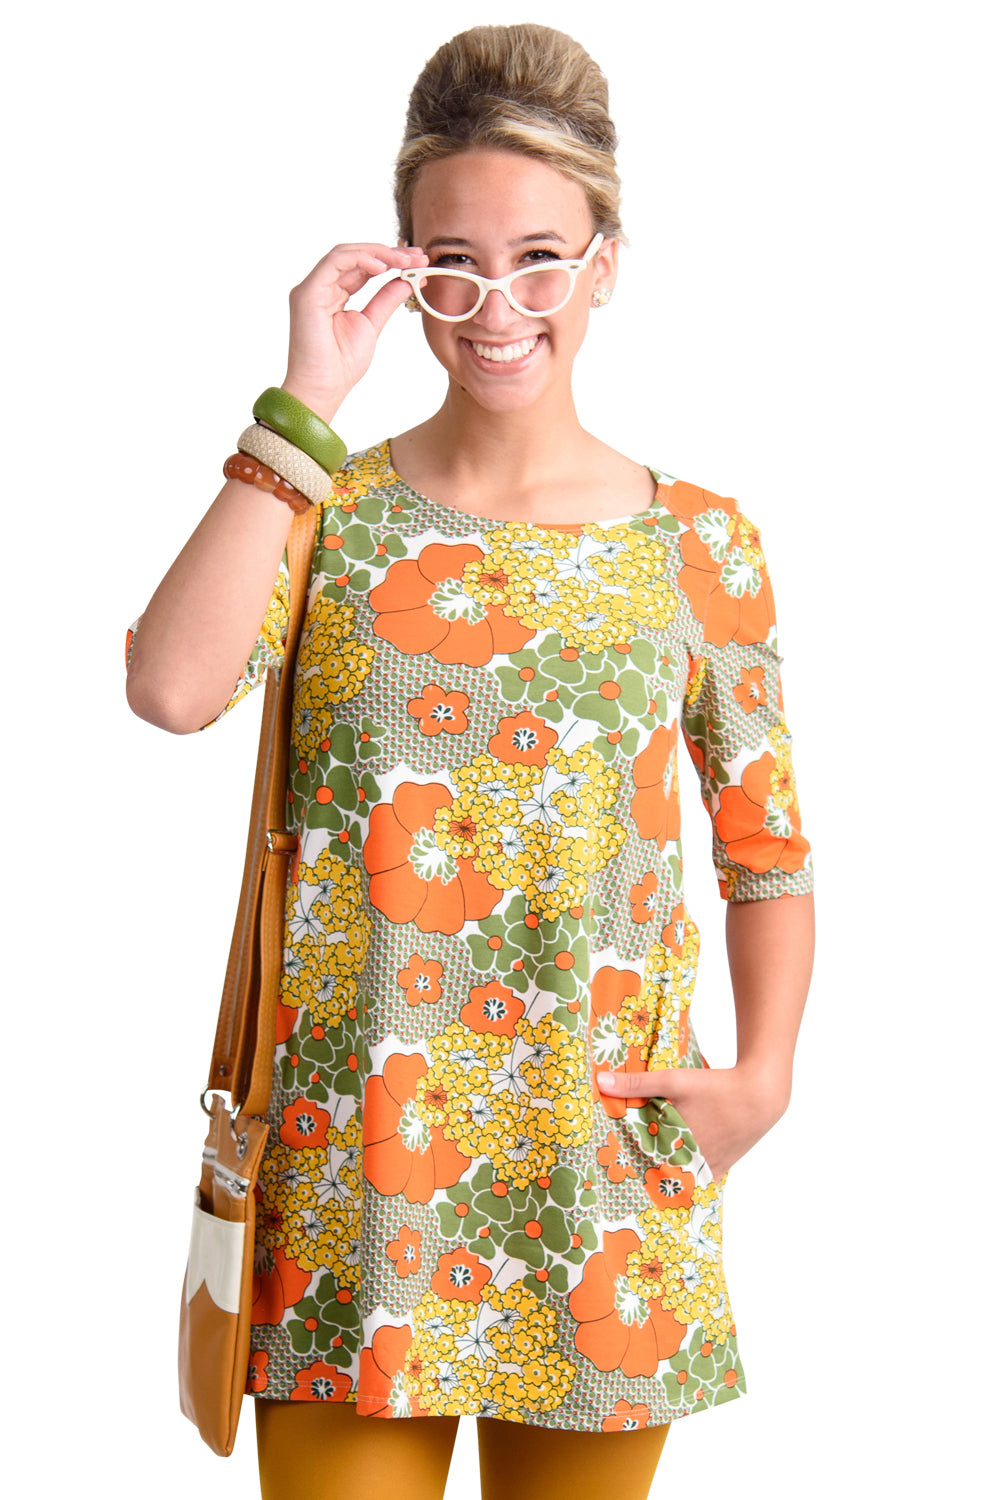 Grooviest Blooms POCKET Tunic in Orange & Olive- XS & S only!